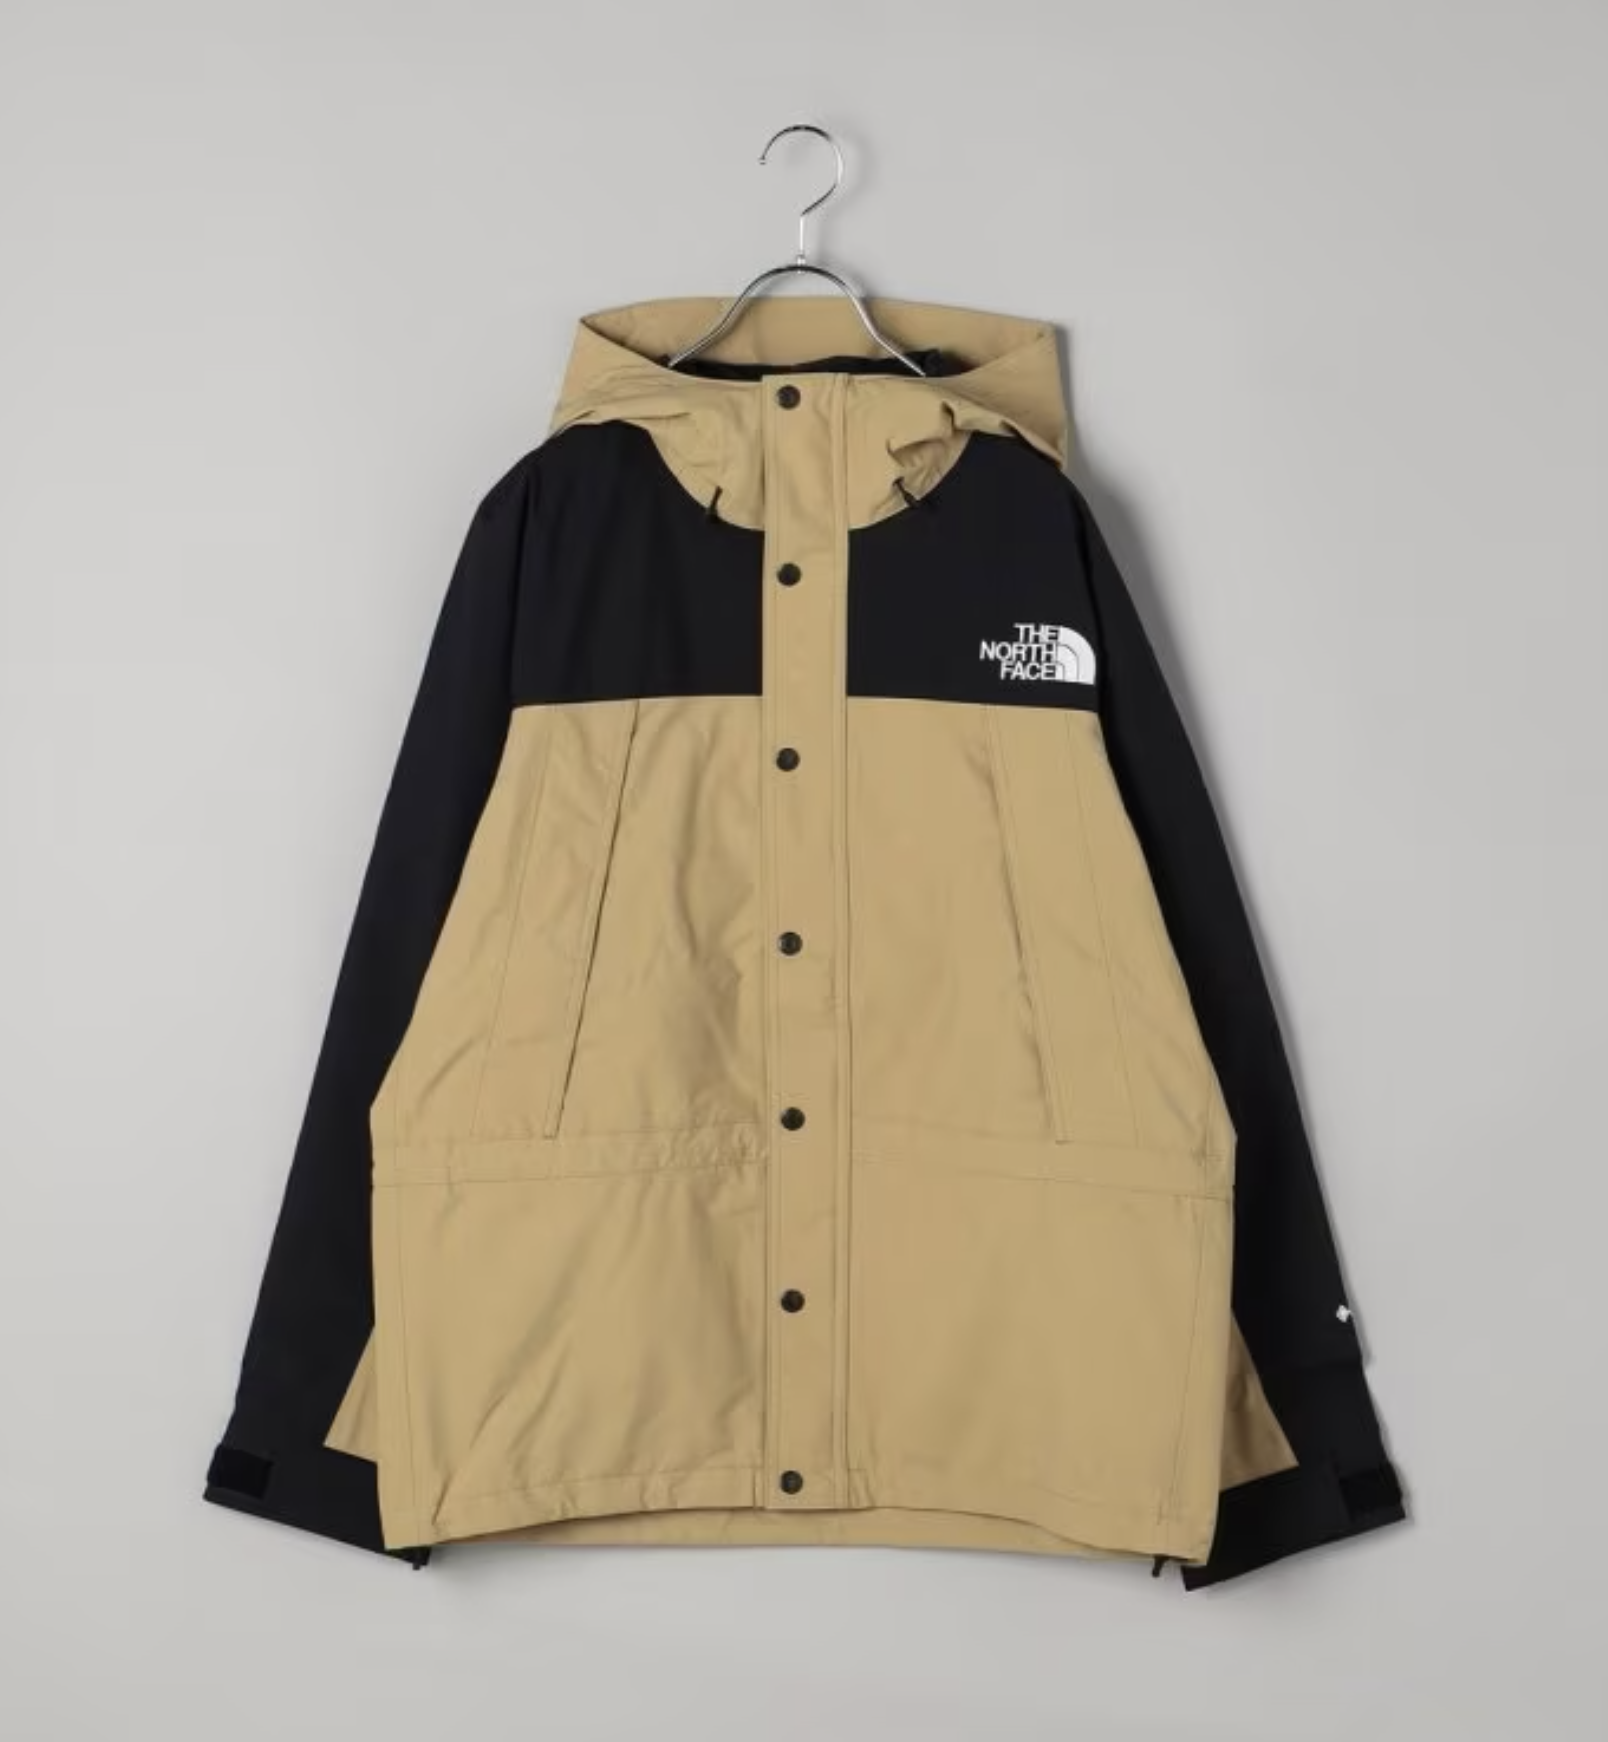 The North Face Mountain Light Jacket (4 colors)